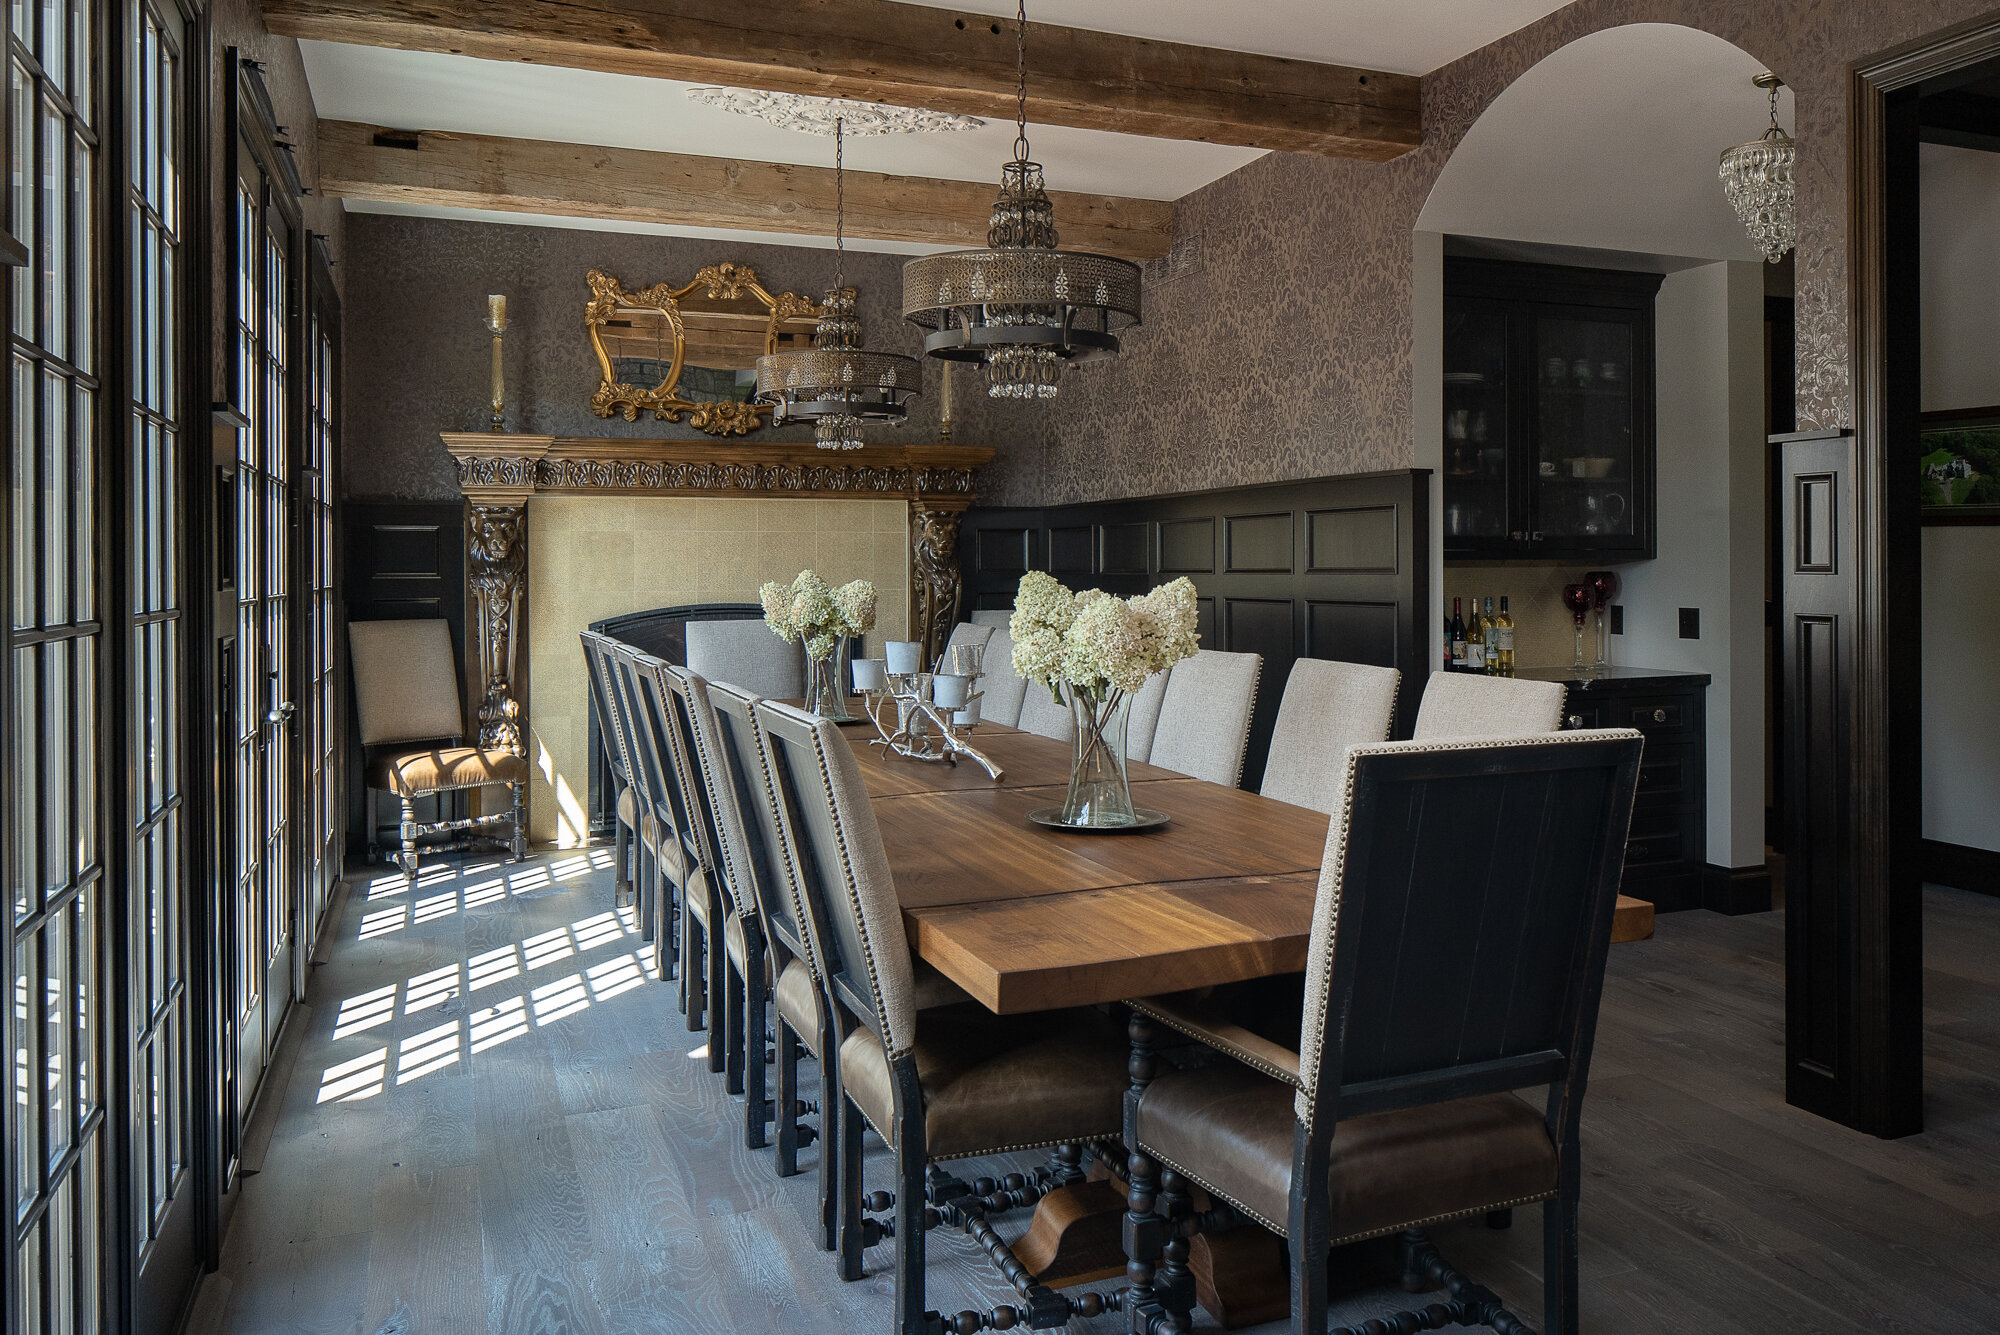 Interiors photography of a medieval-themed dining room